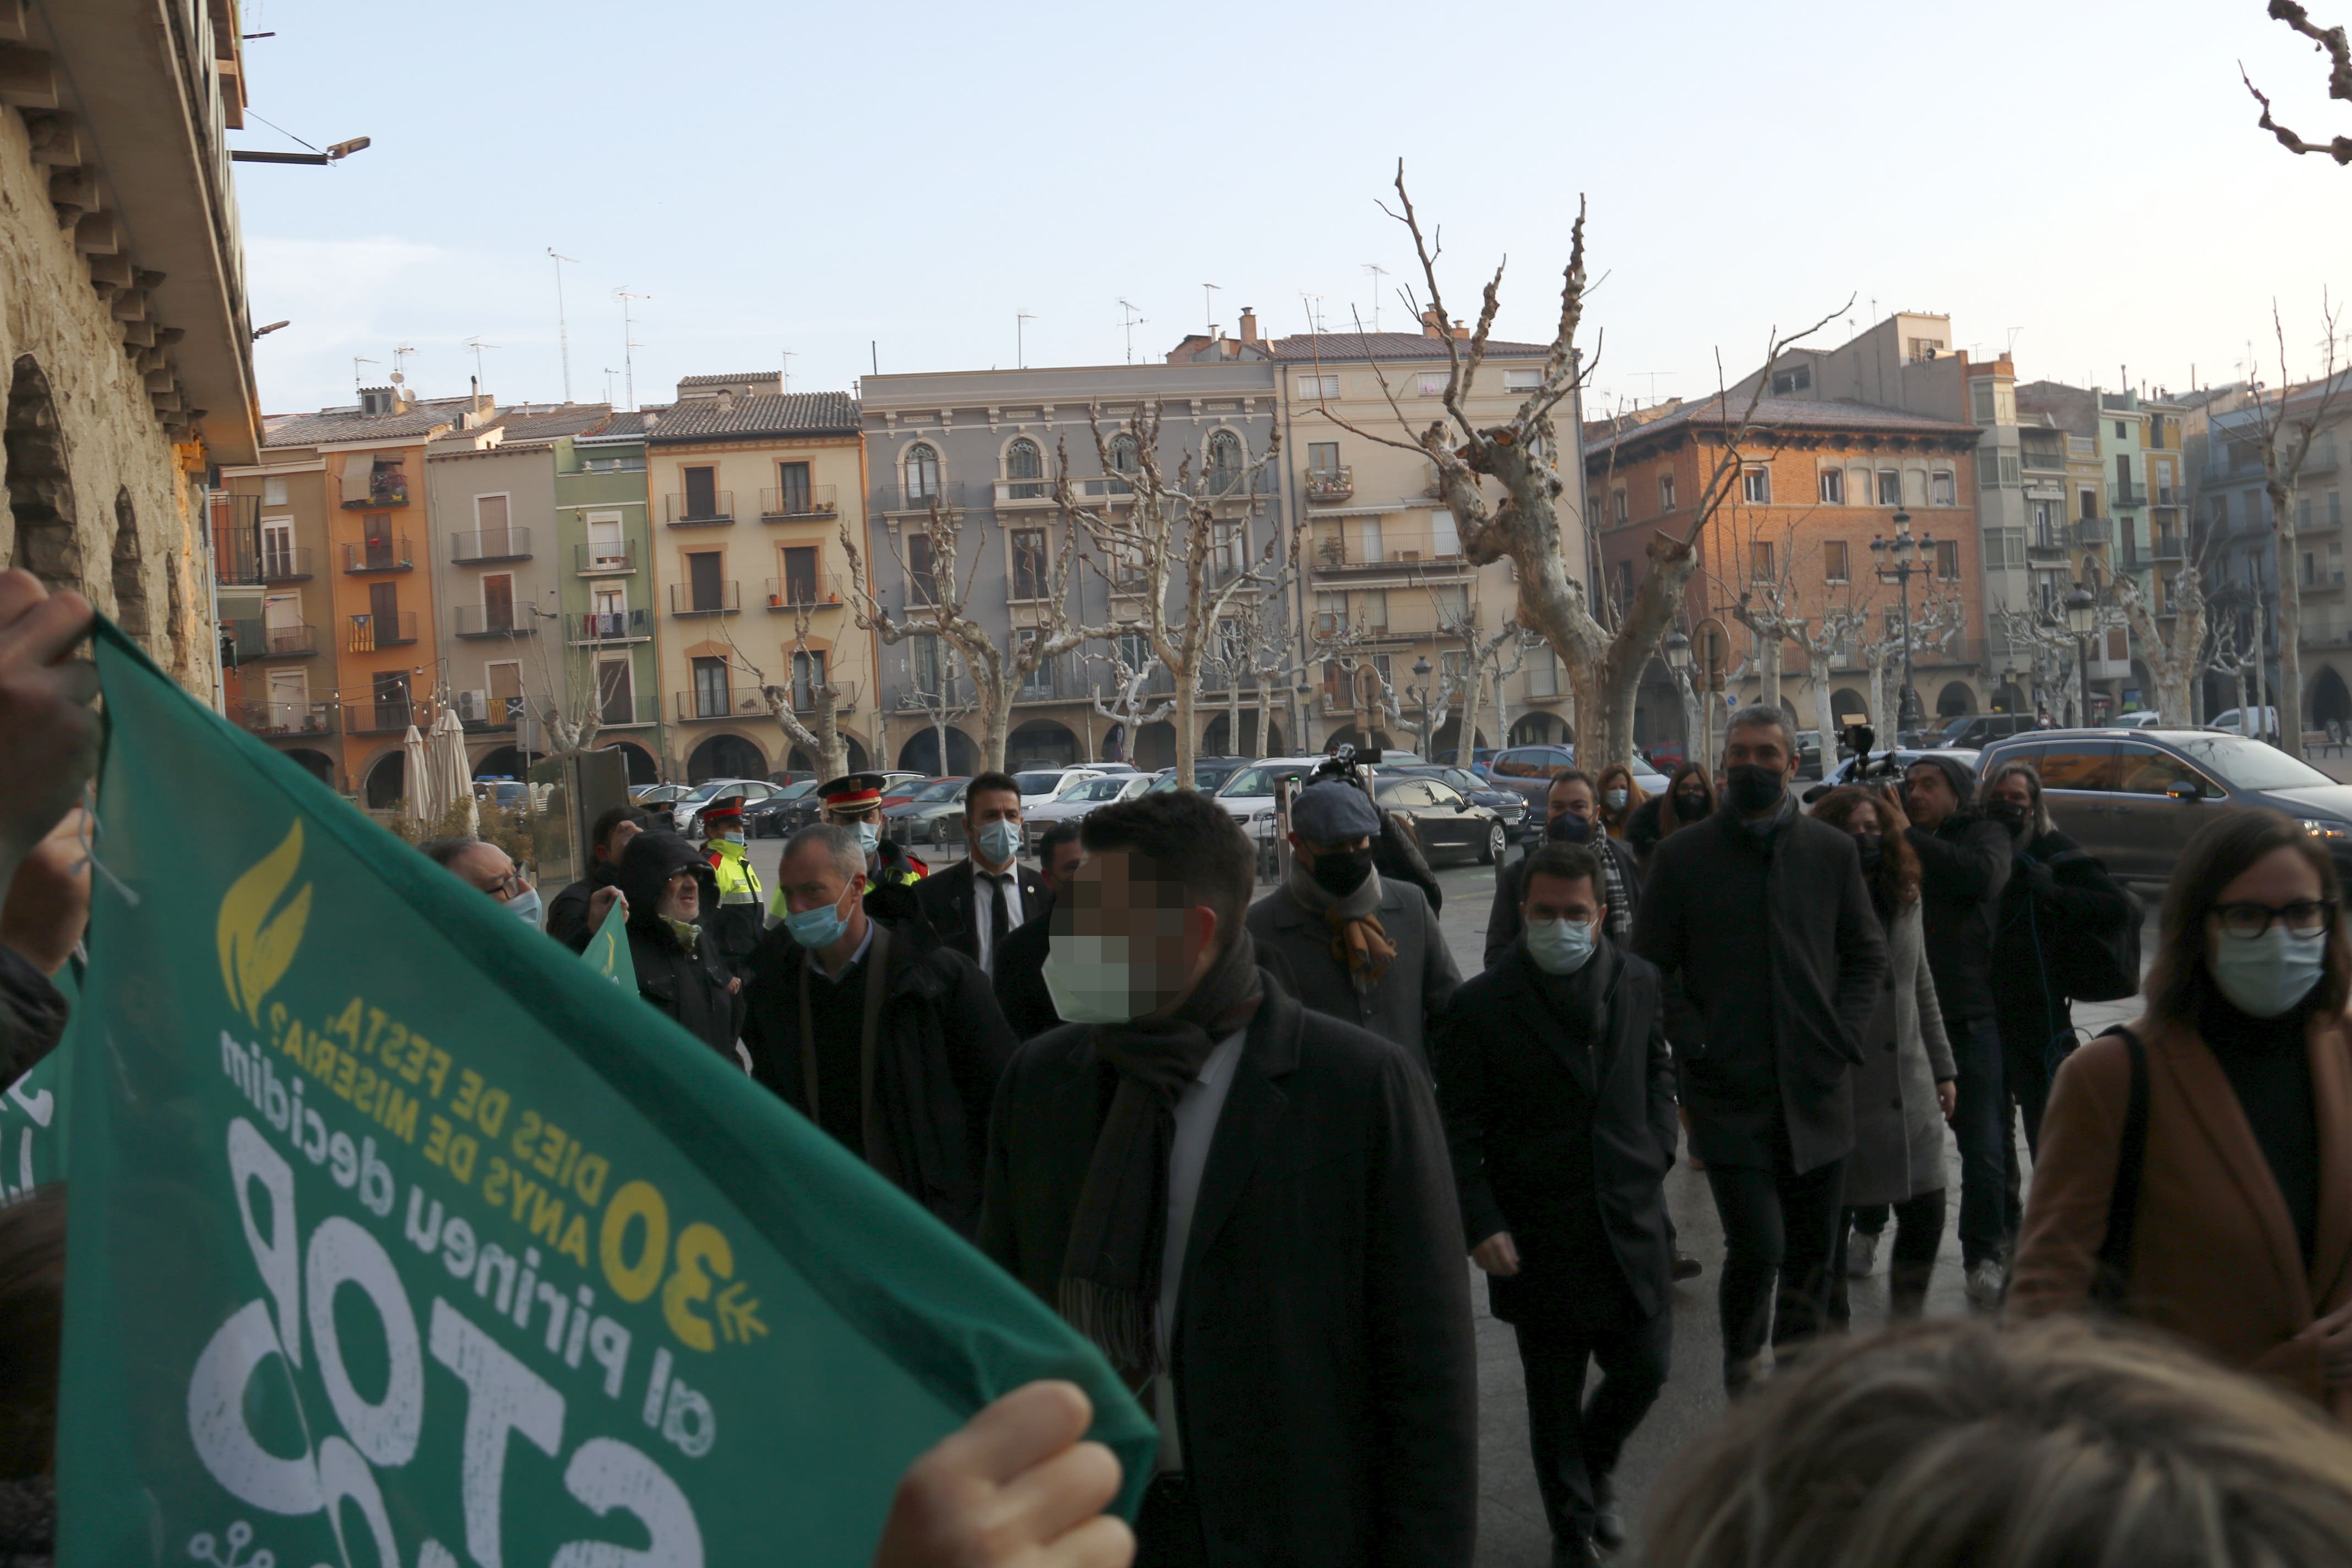 Catalan president Pere Aragonès glances at anti-Olympics protesters in Balaguer on January 28, 2022 (by Laura Cortés)